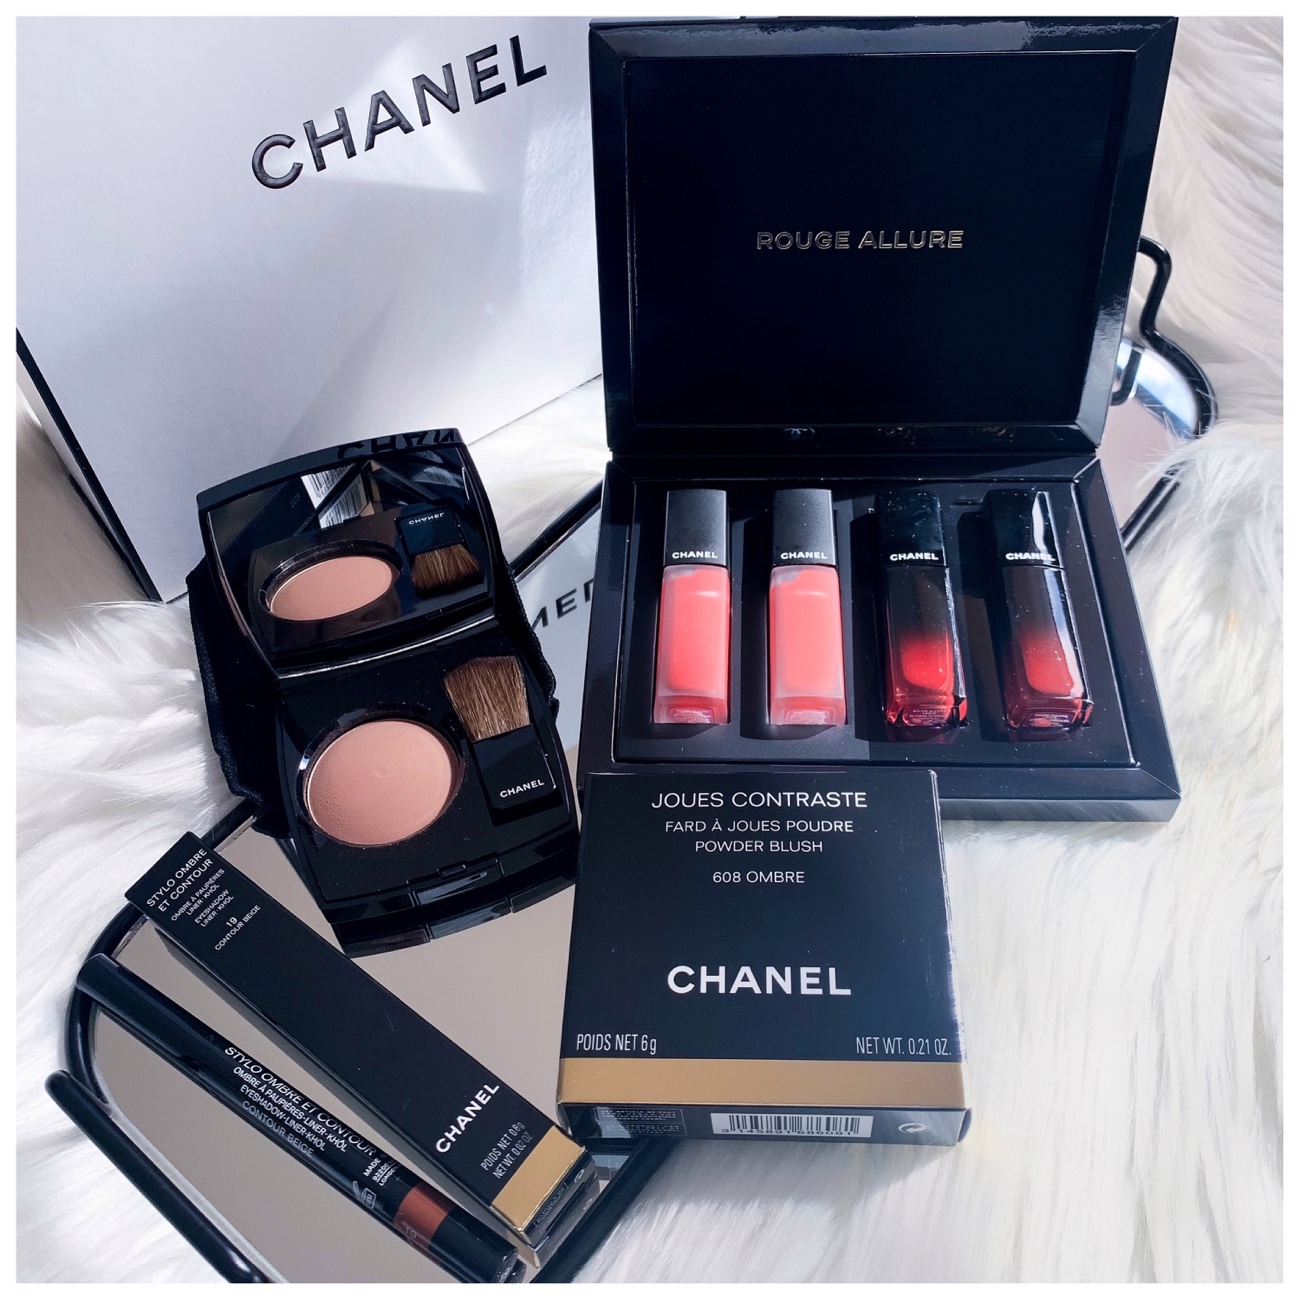 CHANEL, Makeup, New Chanel Beauty Pouch And Rouge Allure Lipstick